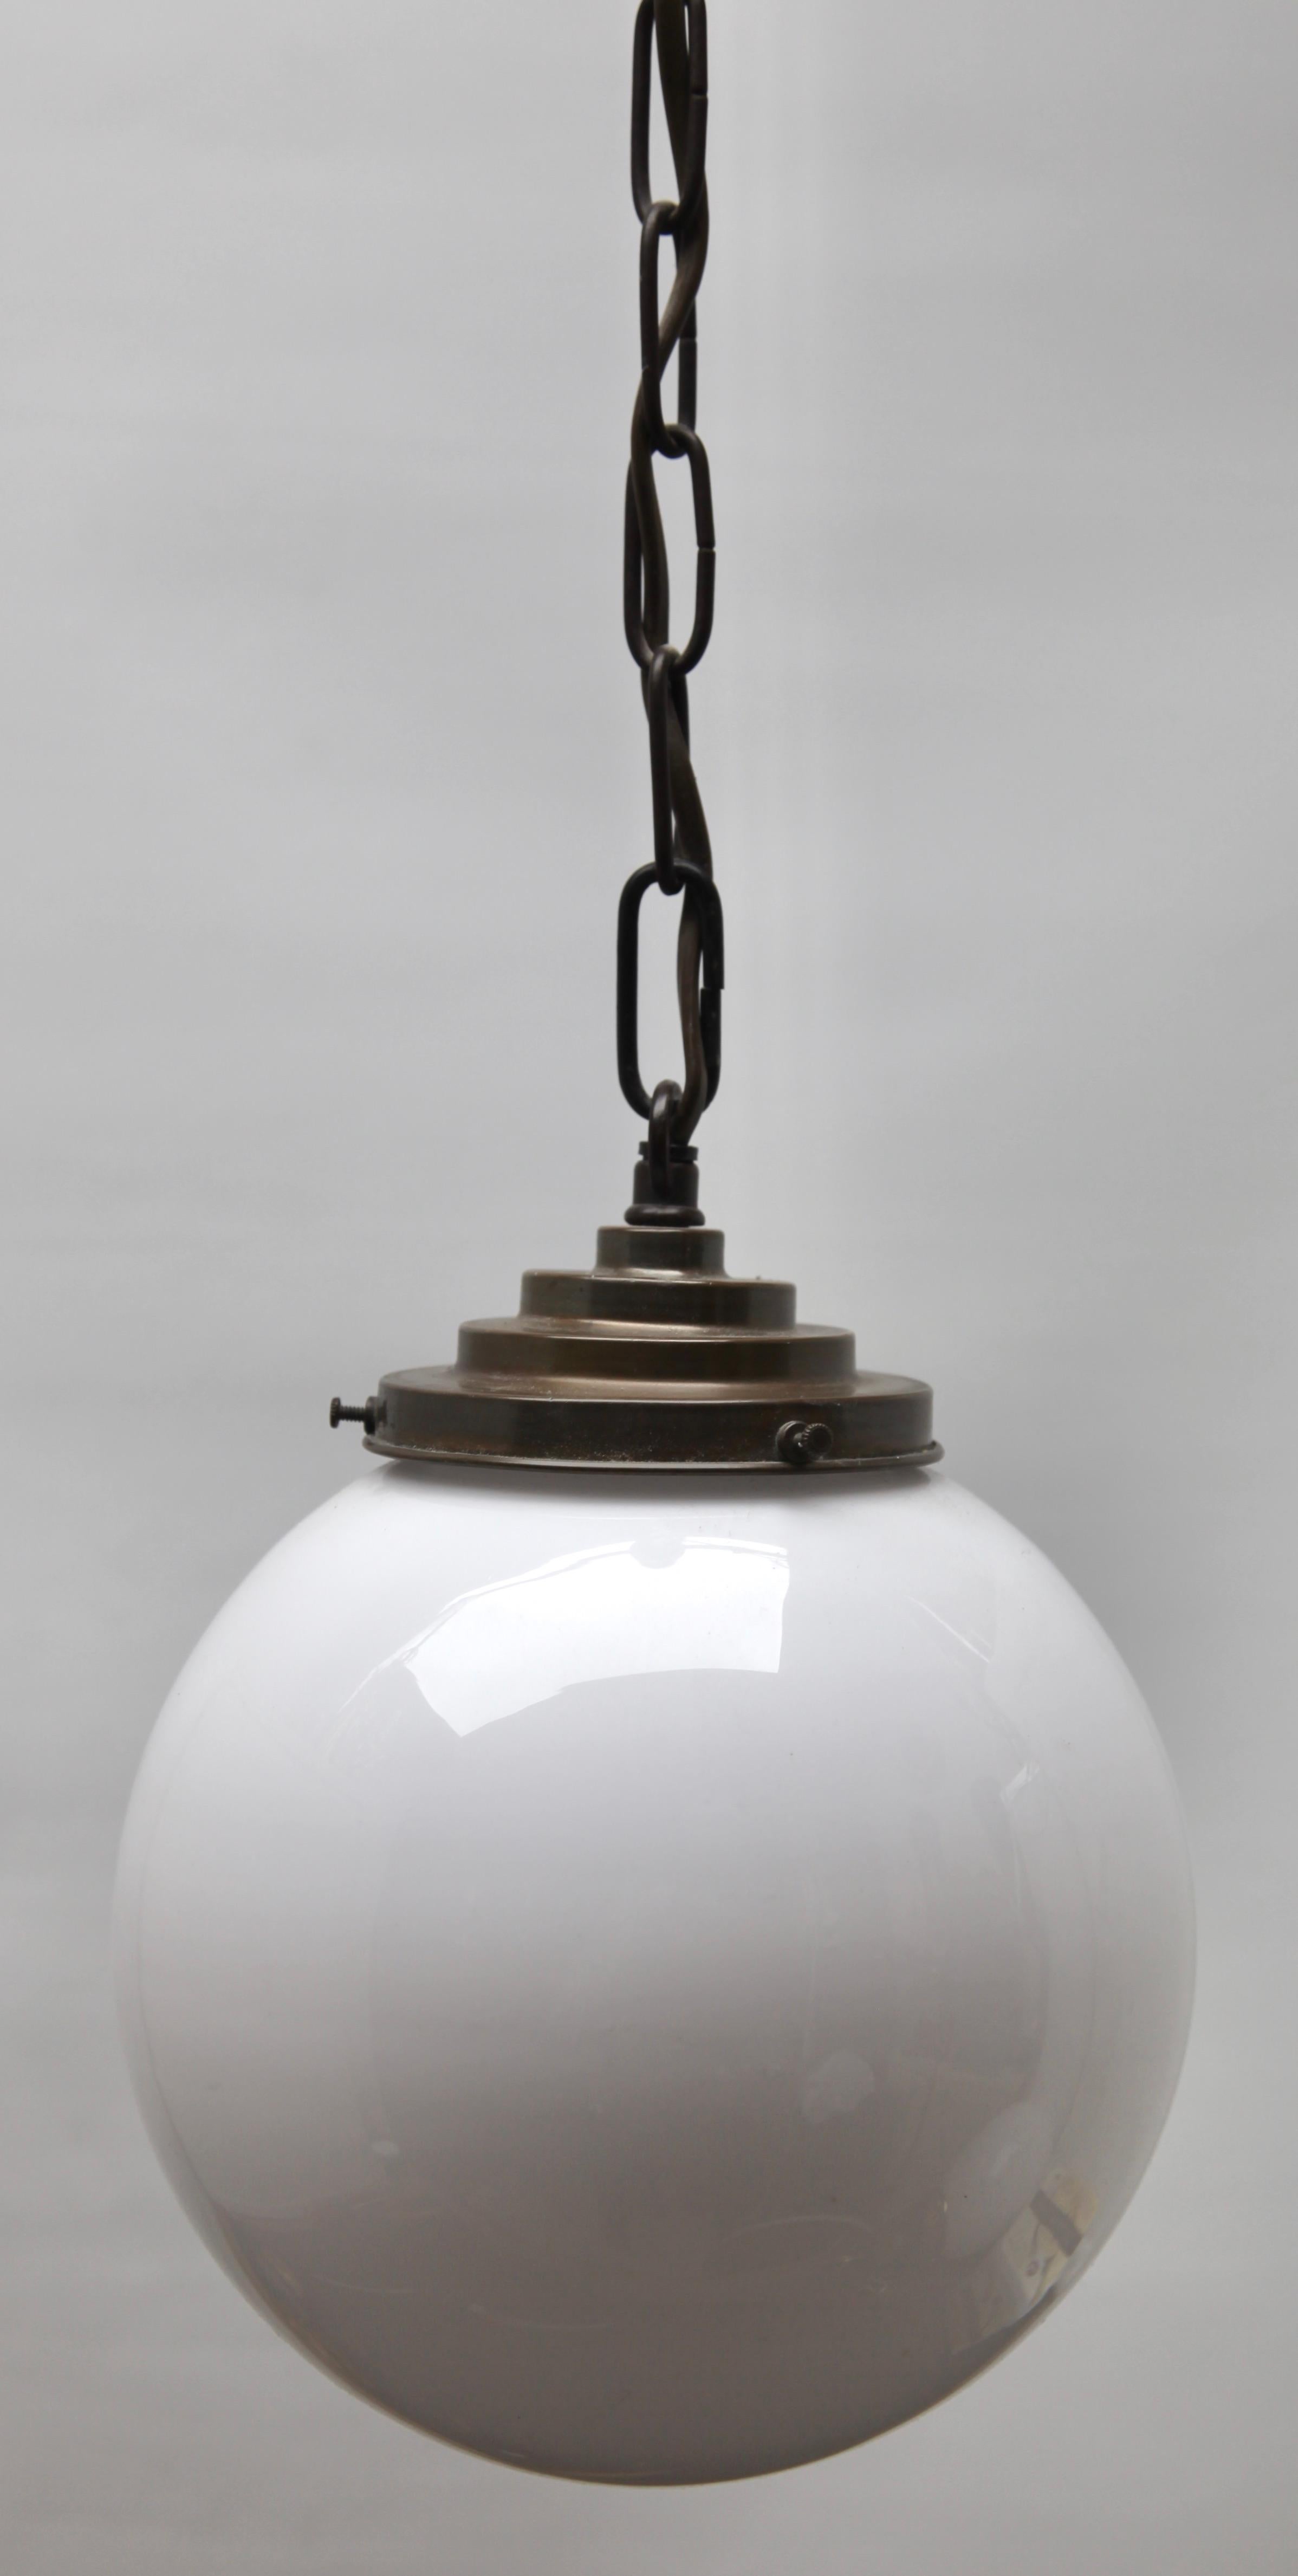 Pendant Lamp with a Opaline Shade, 1930s, Netherlands For Sale 2